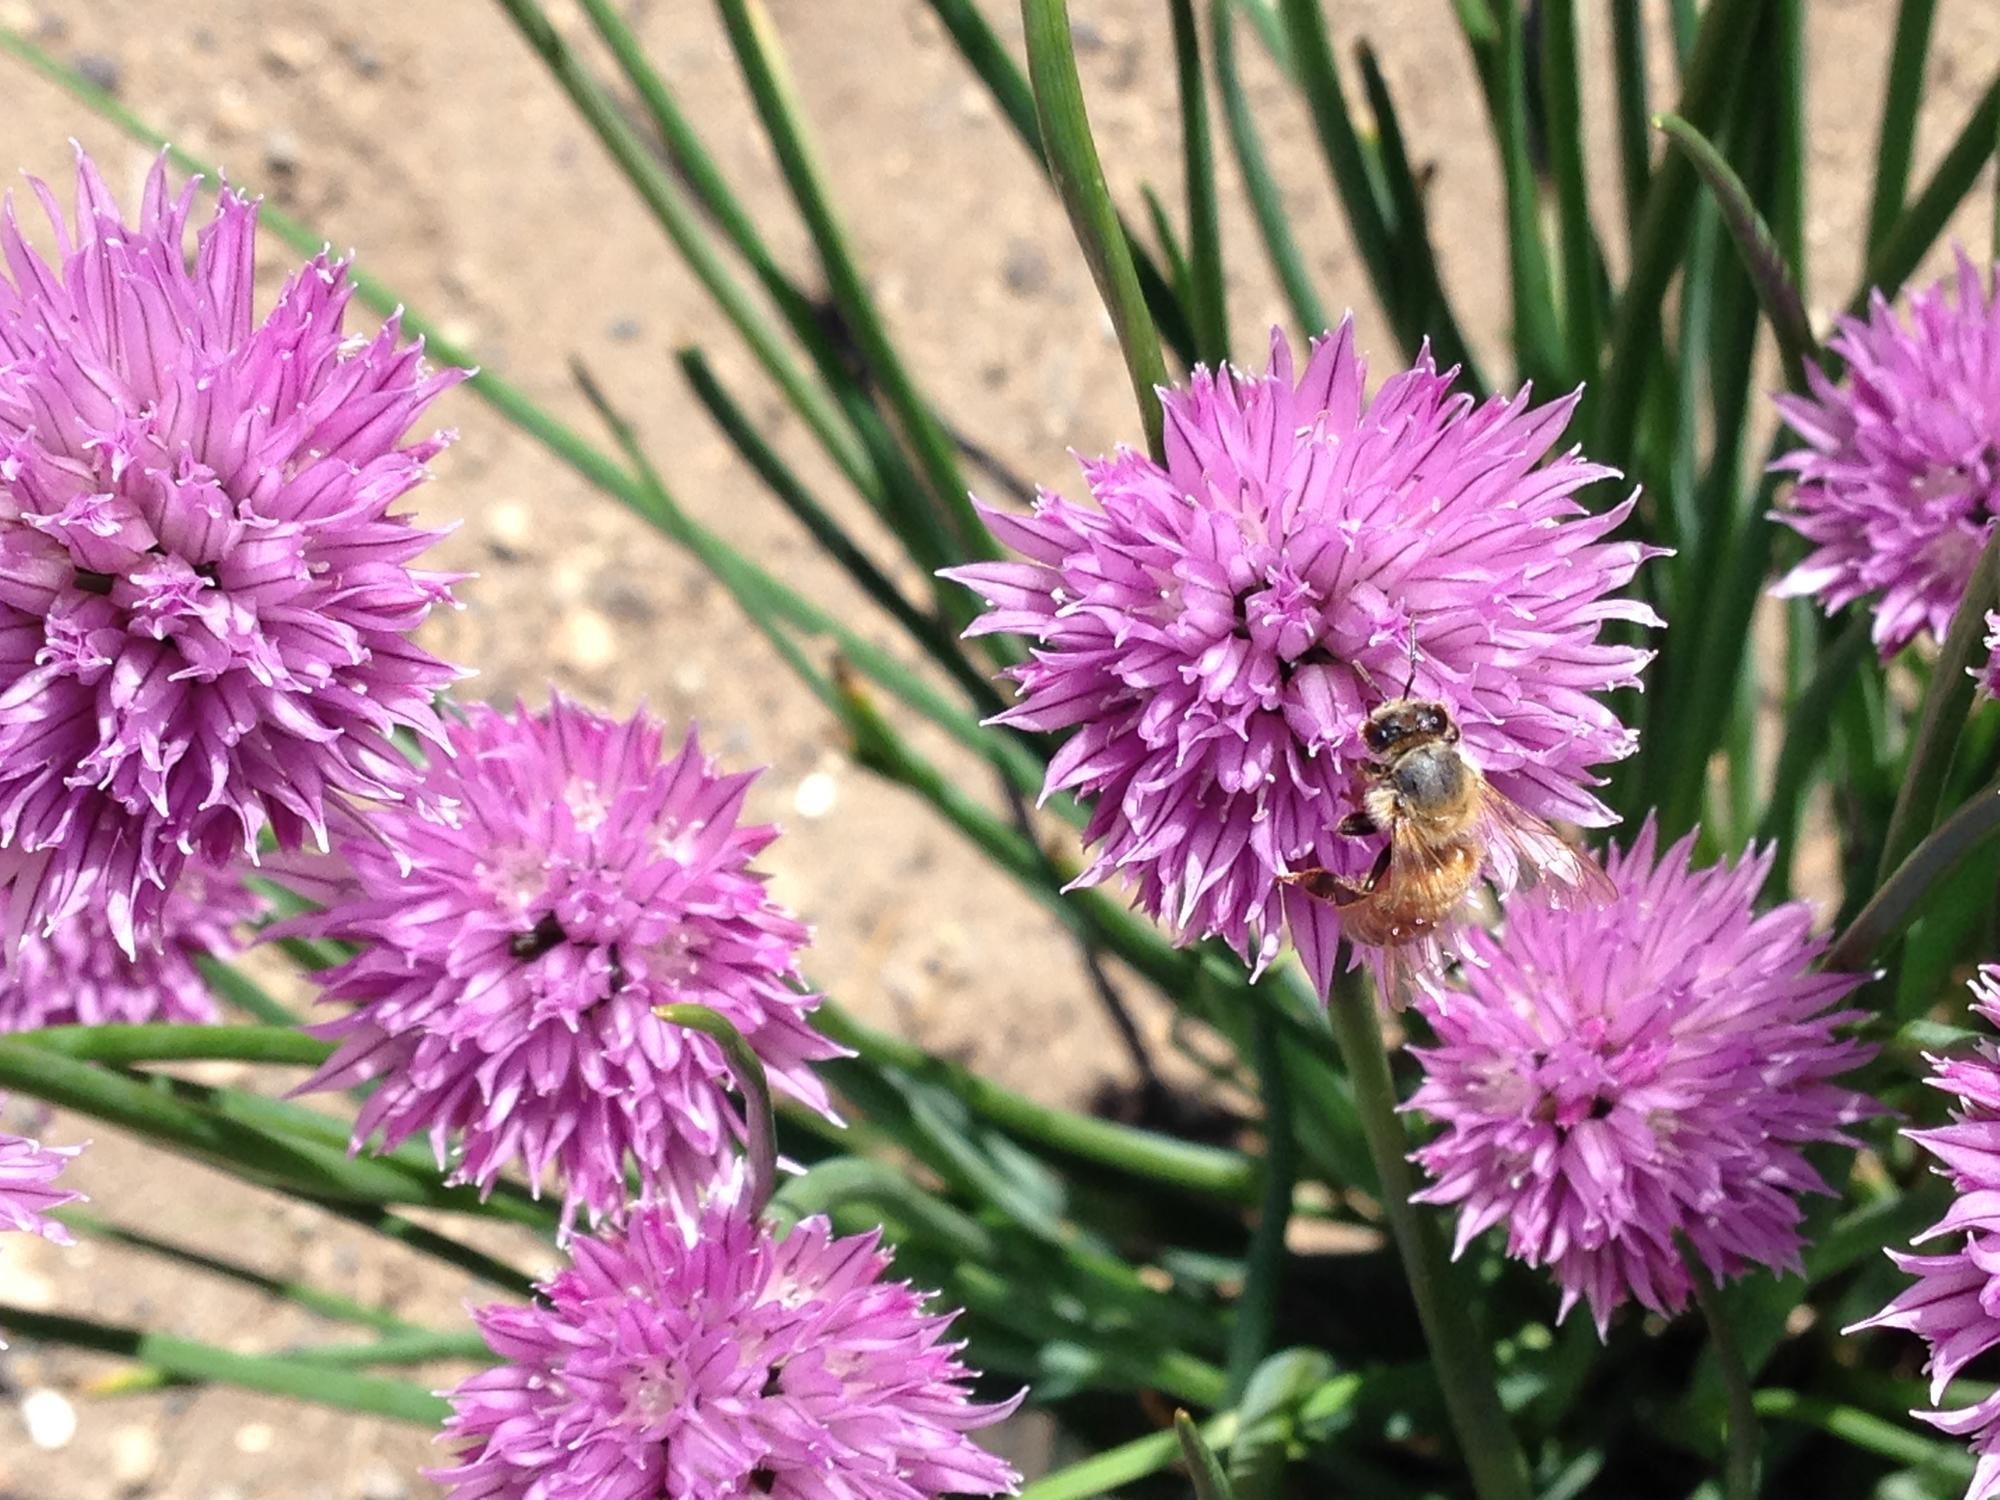 A chives plant with purple blooms and a bee on the flower.